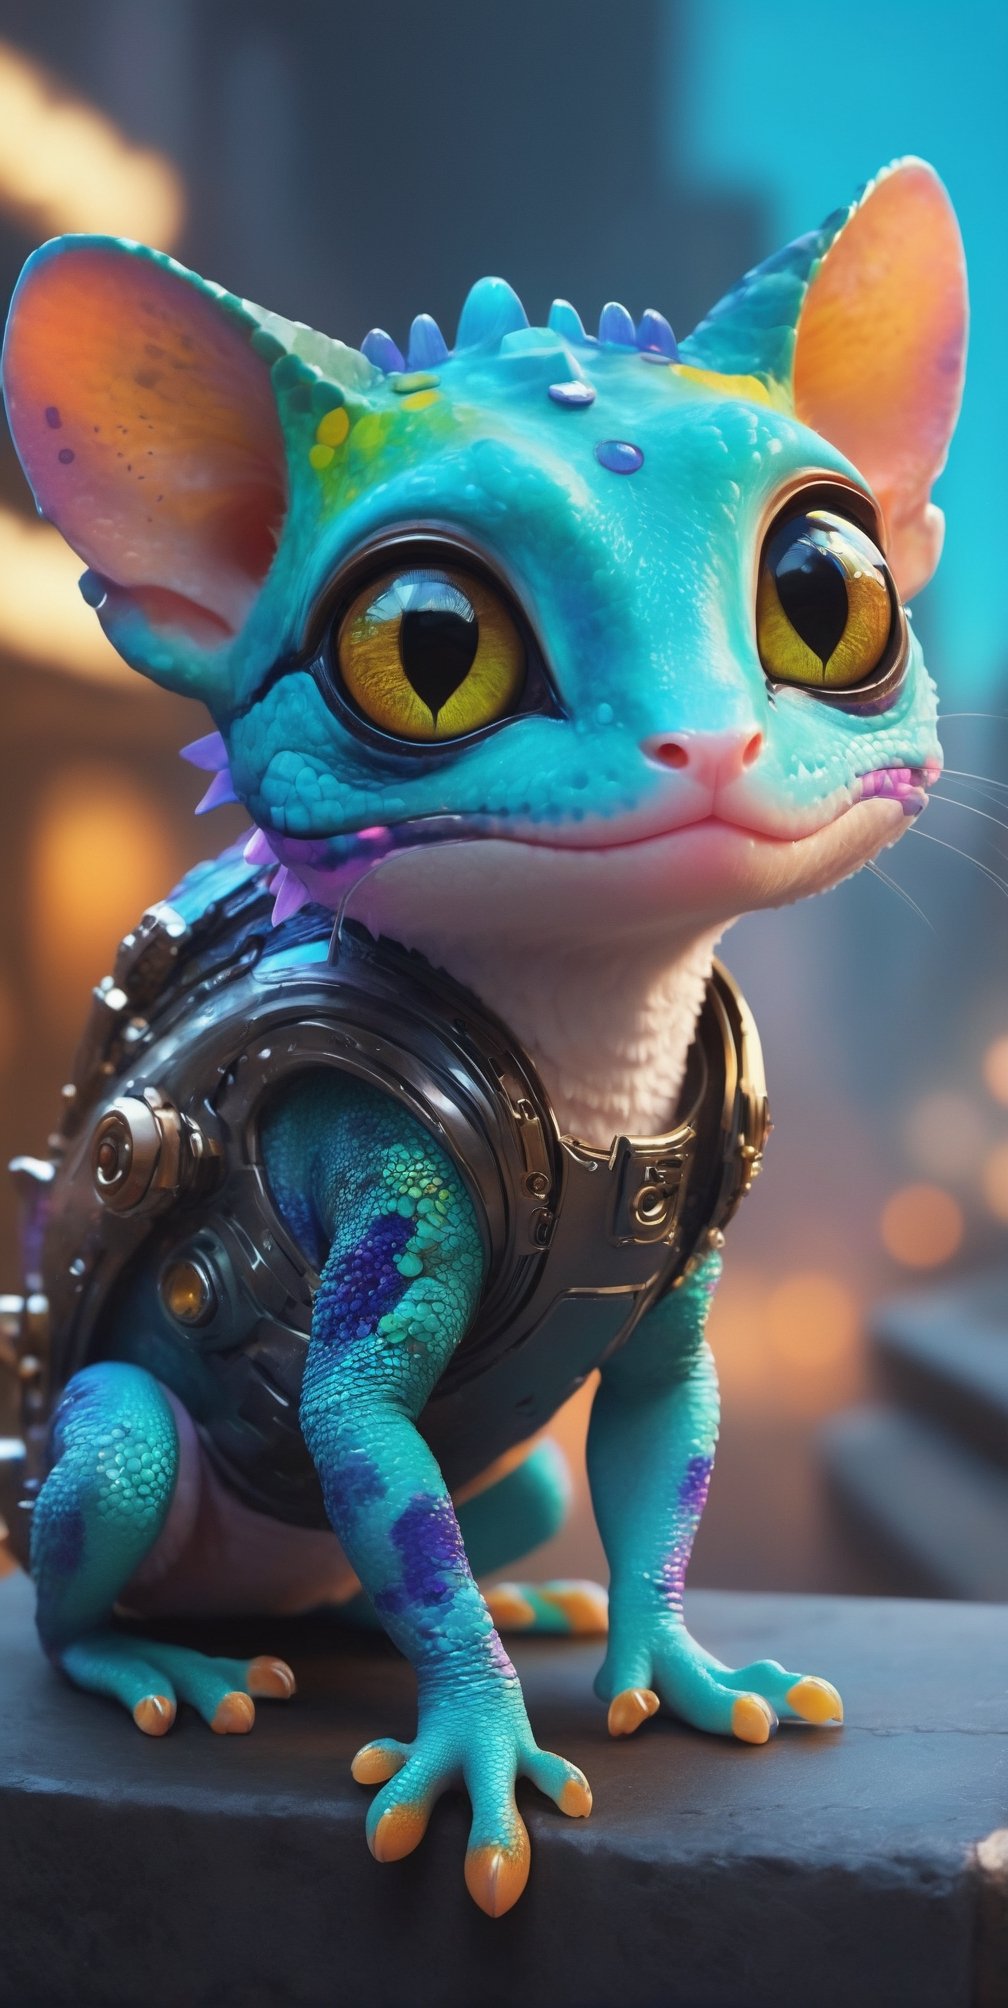 (best quality,8K,highres,masterpiece), ultra-detailed, (character design, creature design, concept art), cute gecko with big eyes and chameleon-skin, featuring adorable cat paws. The whimsical combination of features results in a charming and imaginative portrayal of this fantastical creature.,cyberpunk style